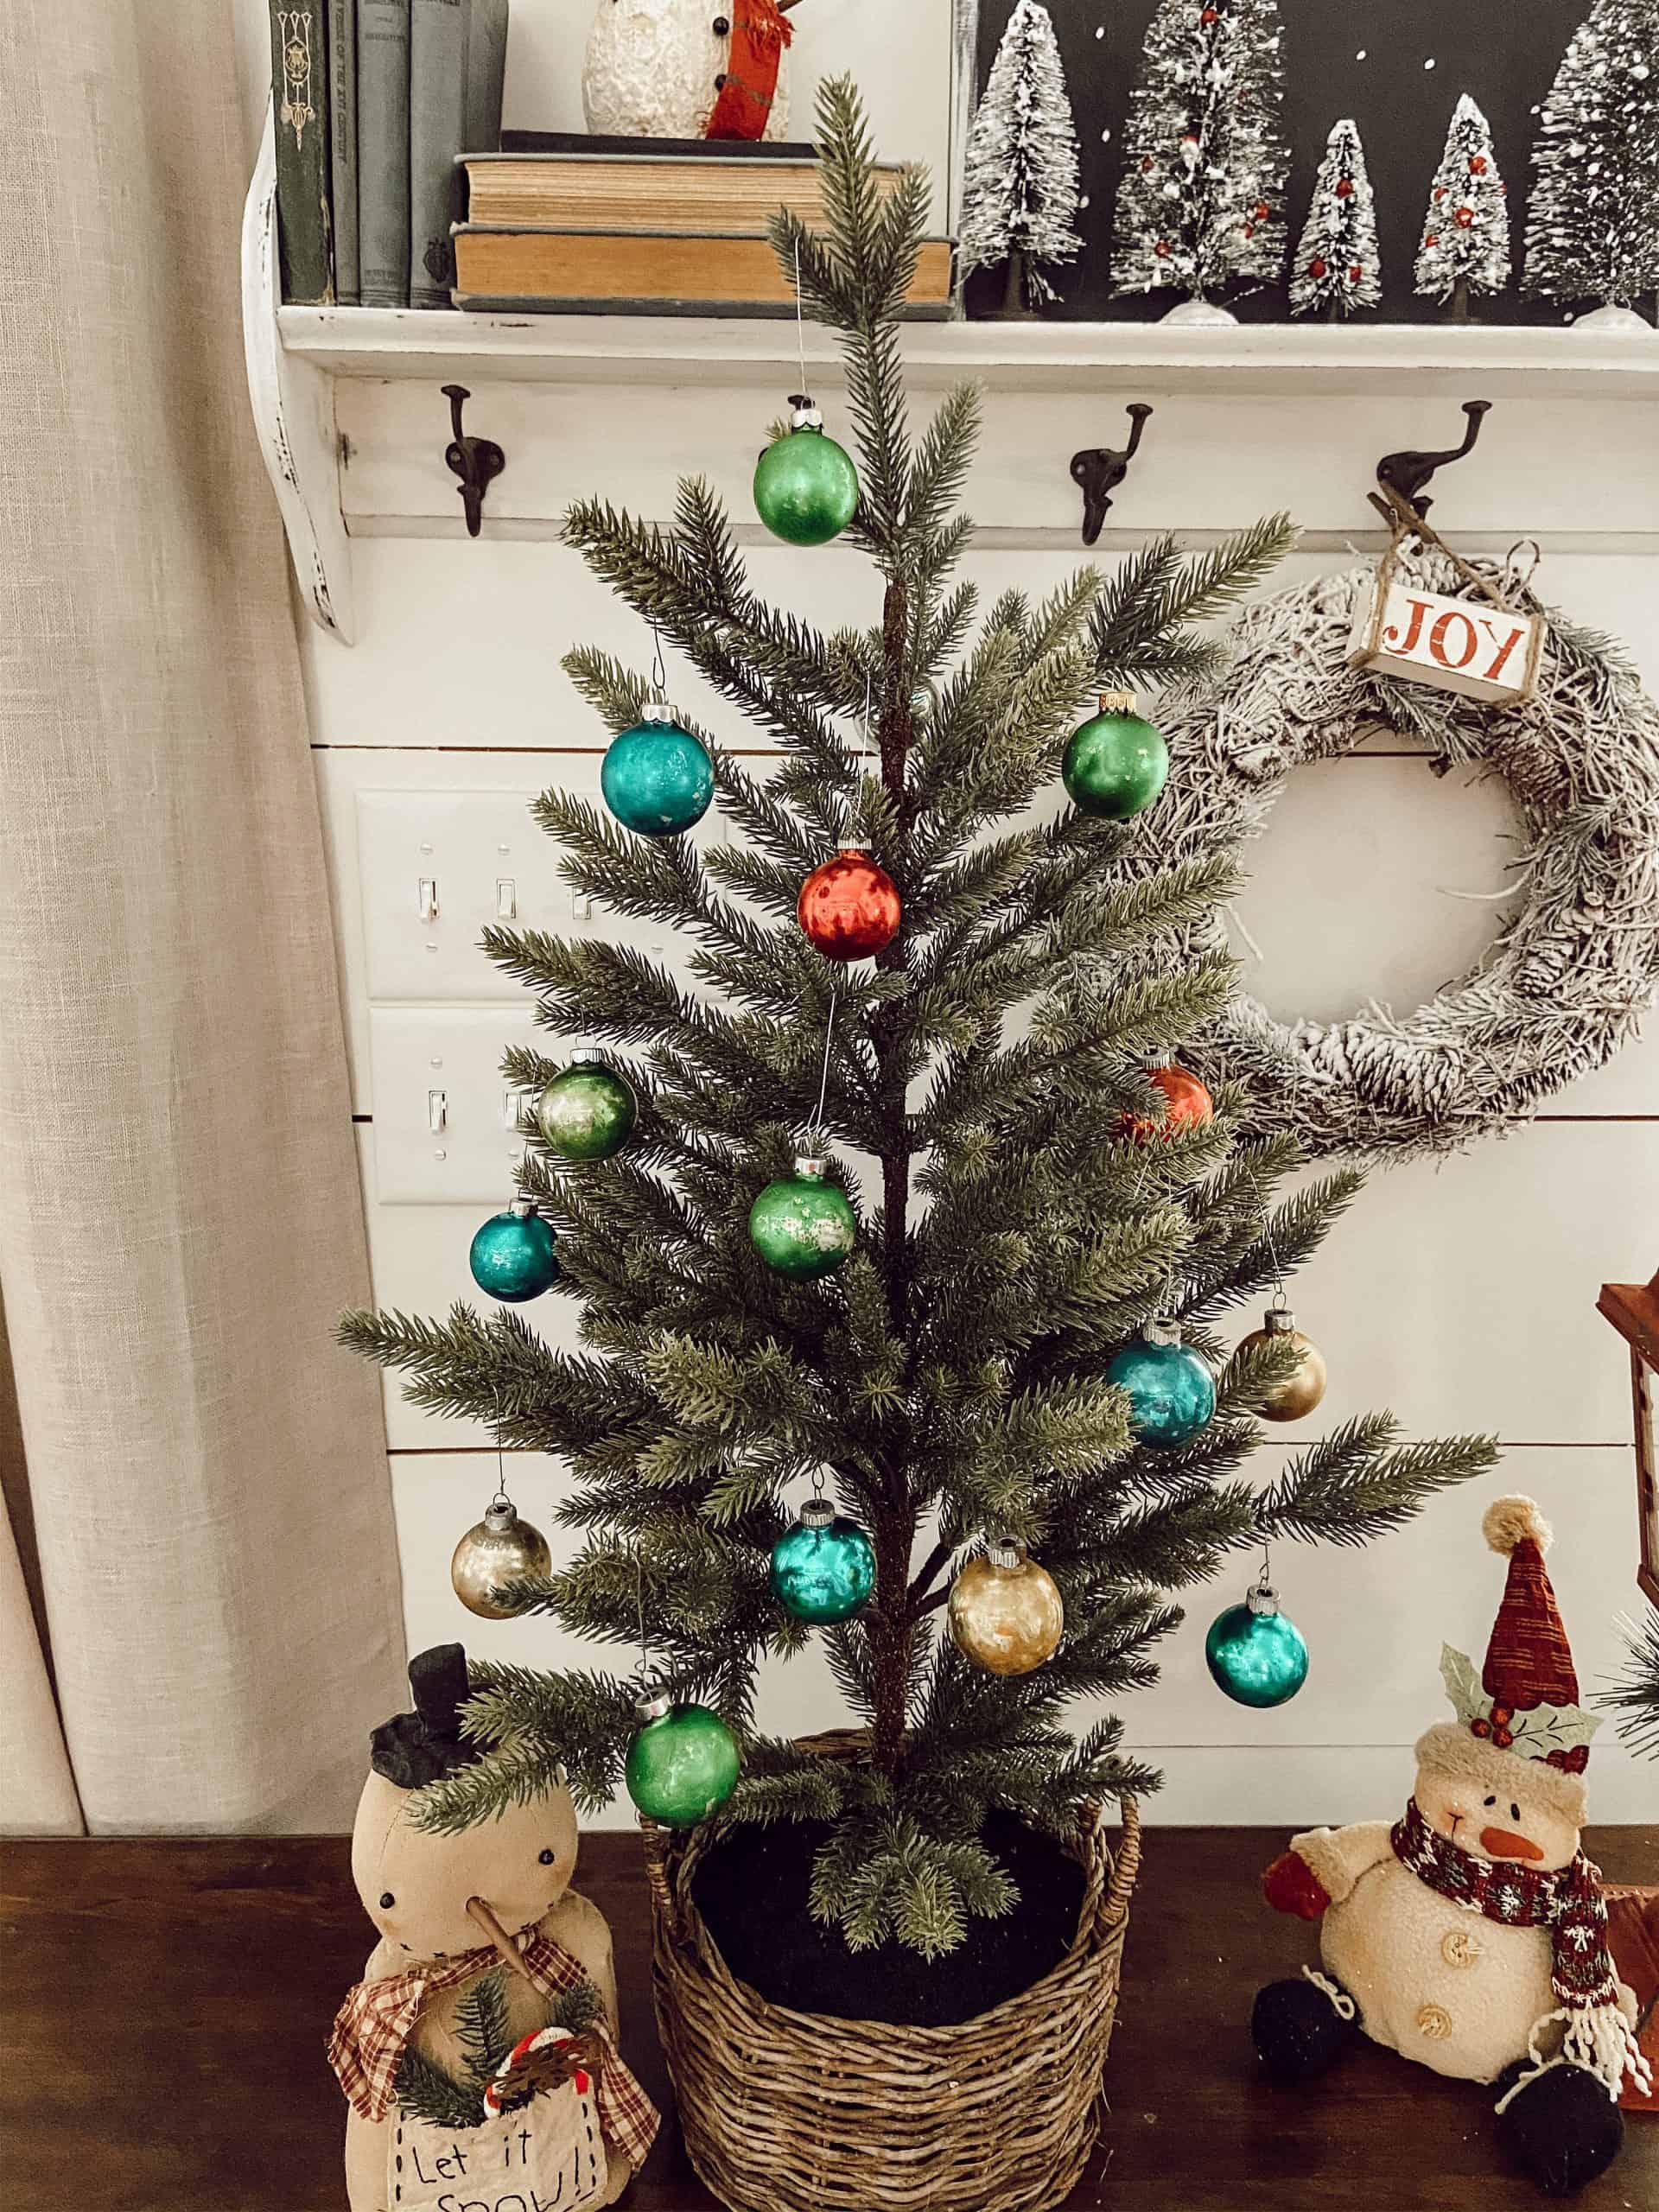 Easiest Way to Age New Christmas Ornaments